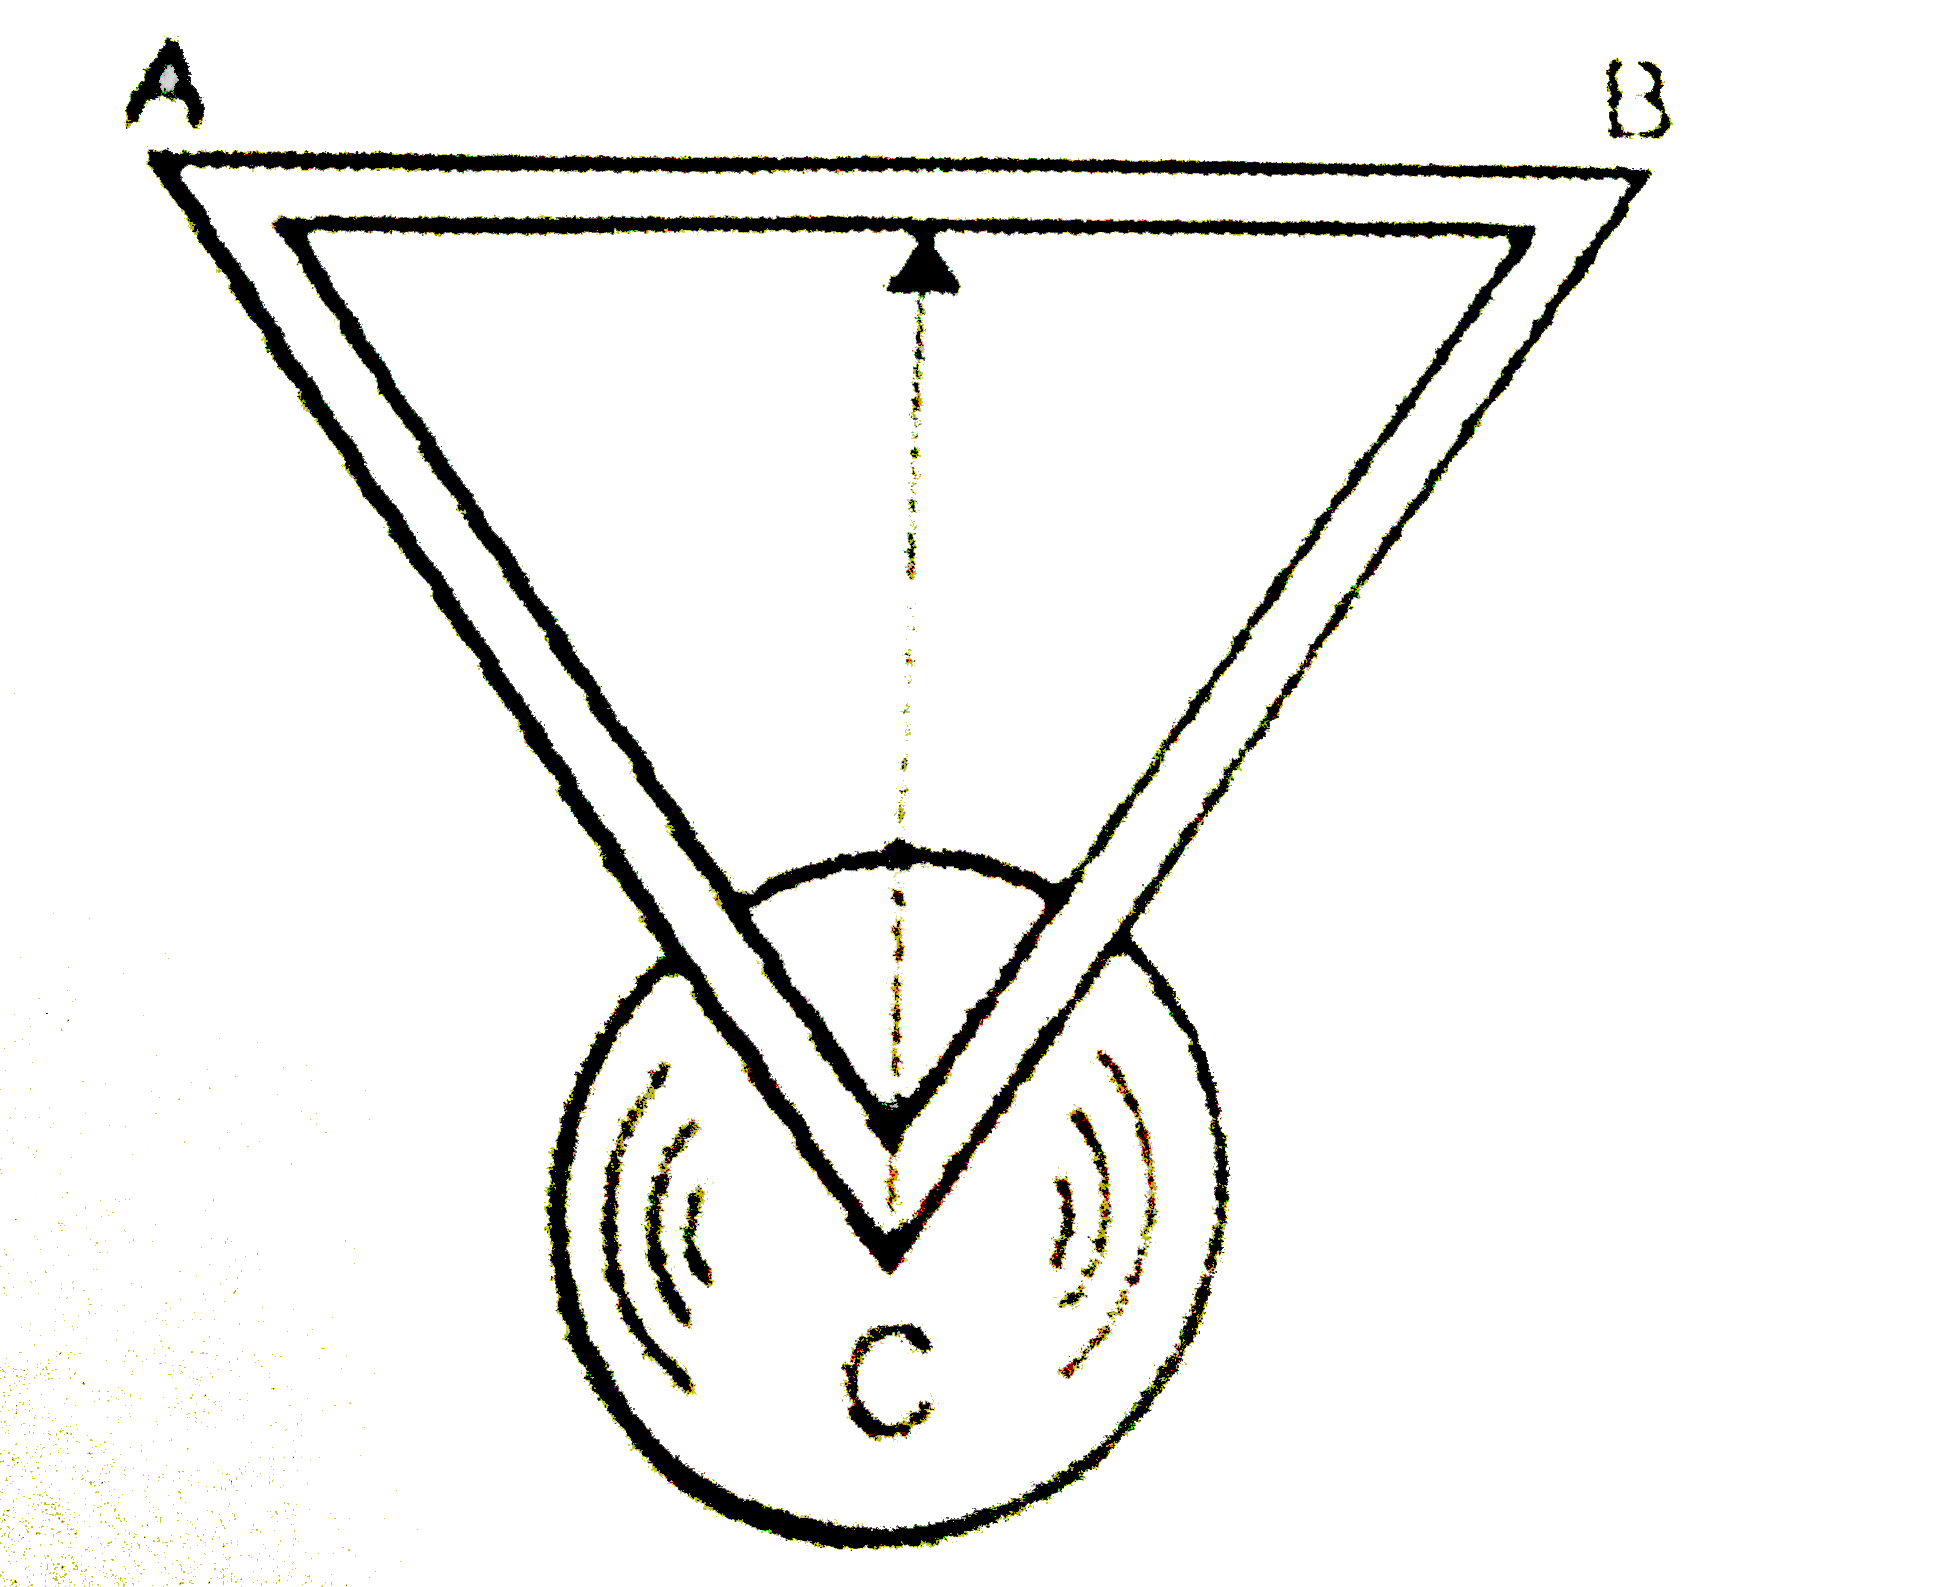 The compensated pendulum of a clock consista of an isosceles triangular frame of base length l(1) and expansivity alpha(1) and side length l(2) and expansivity alpha(2). The pendulum is supported as shown in the figure. Calculate the ratio l(1)//l(2) so that the length of the pendulum may remain unchanged at all temperatures?